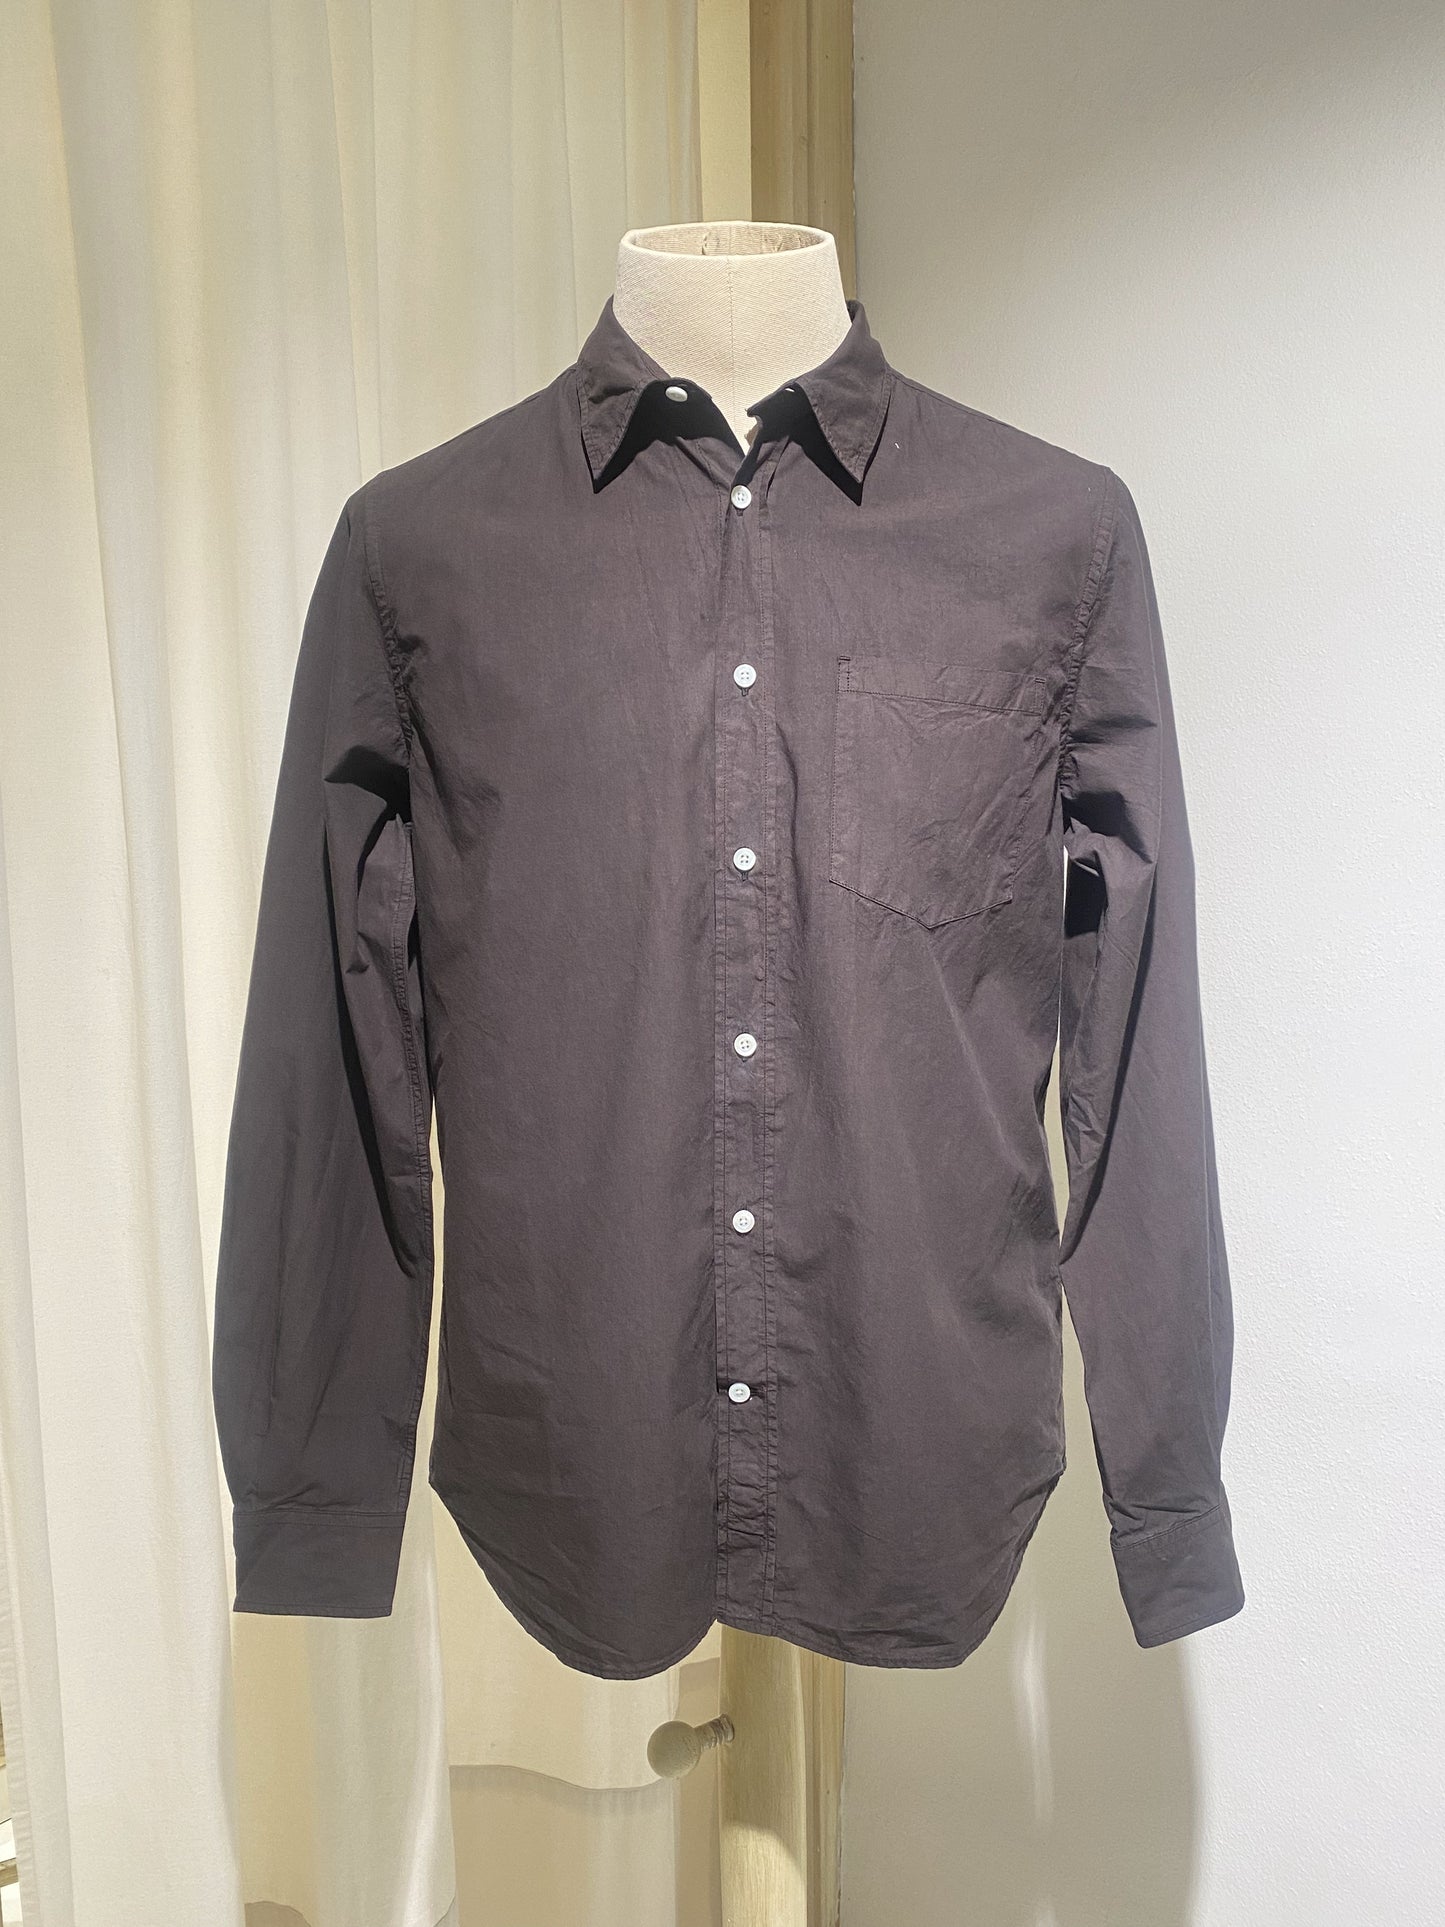 M OSVALD COTTON TENCEL SHIRT NORSE PROJECTS ESPRESSO